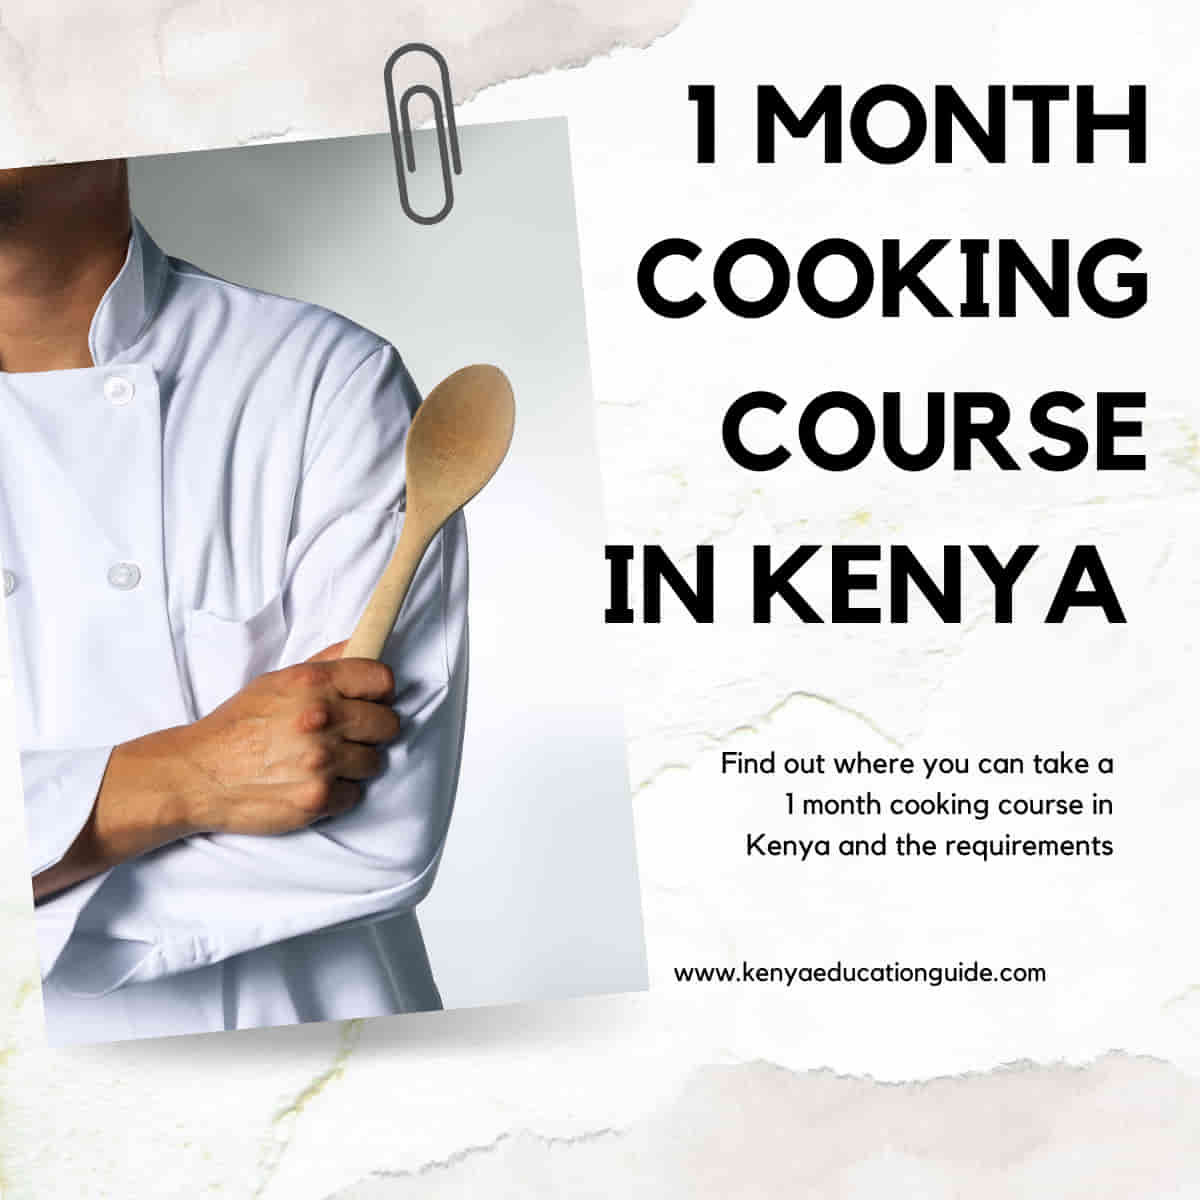 1 month cooking course in Kenya